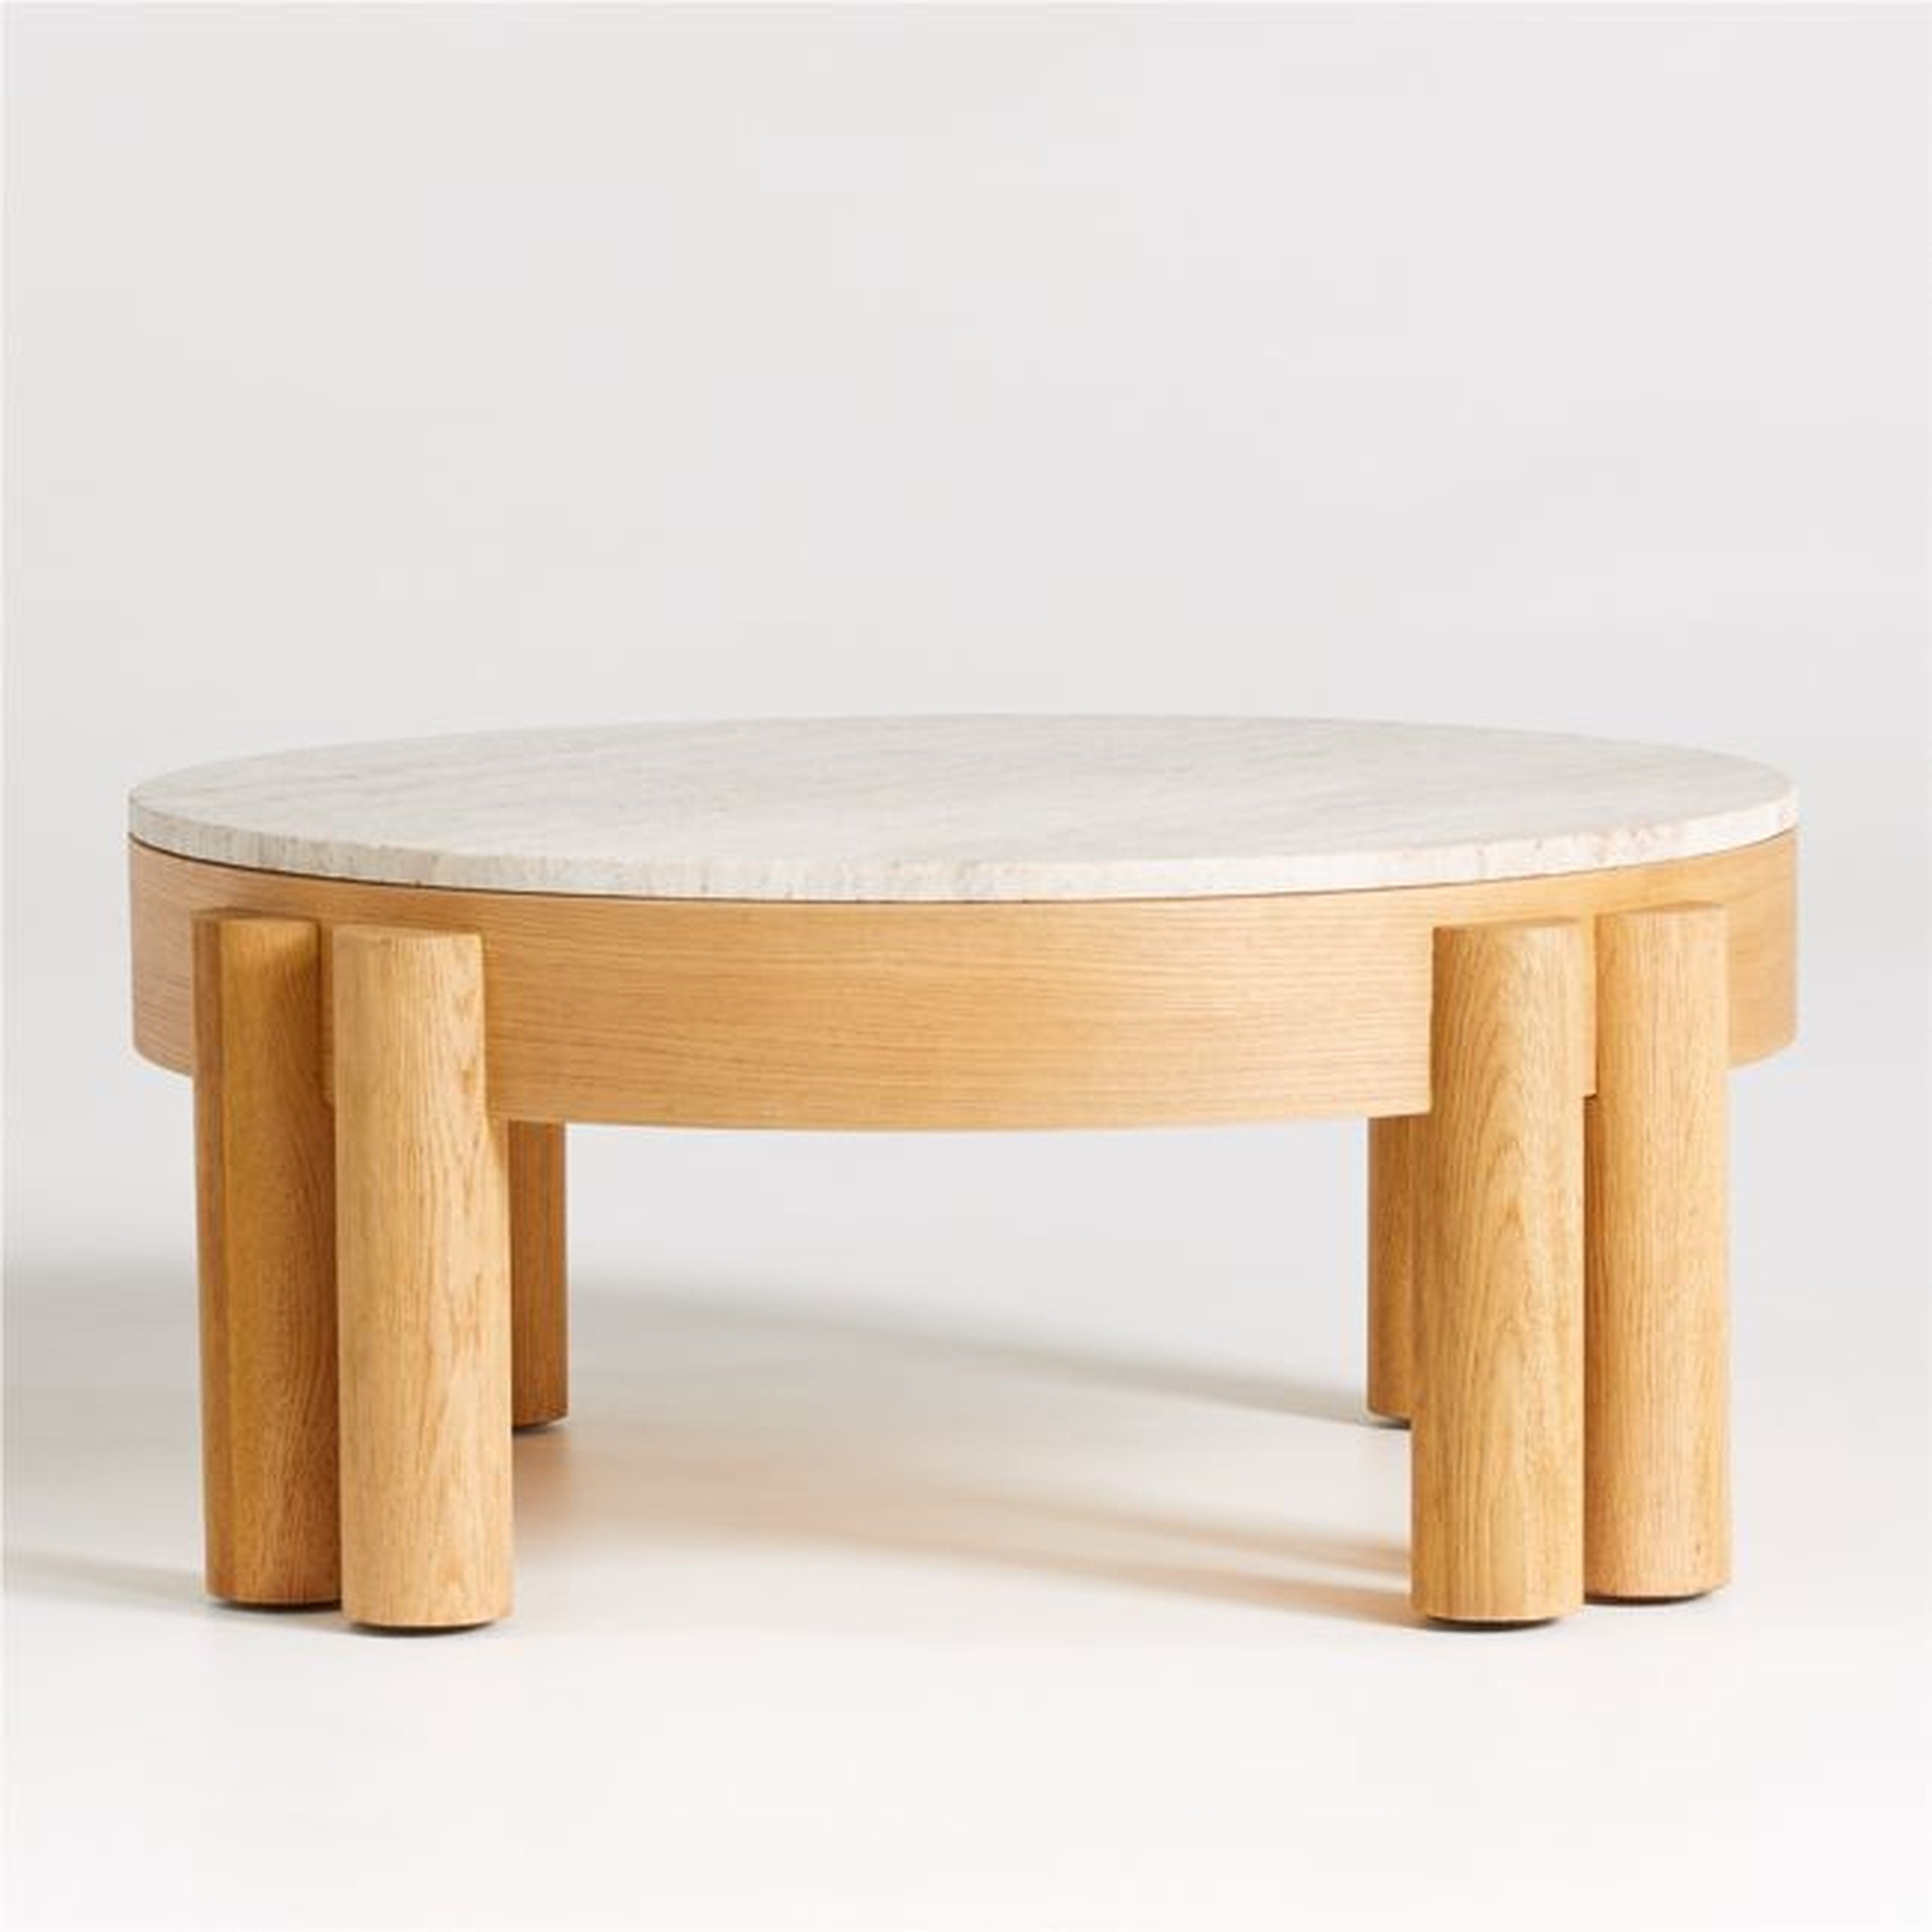 Oasis Round Wood Coffee Table - Crate and Barrel